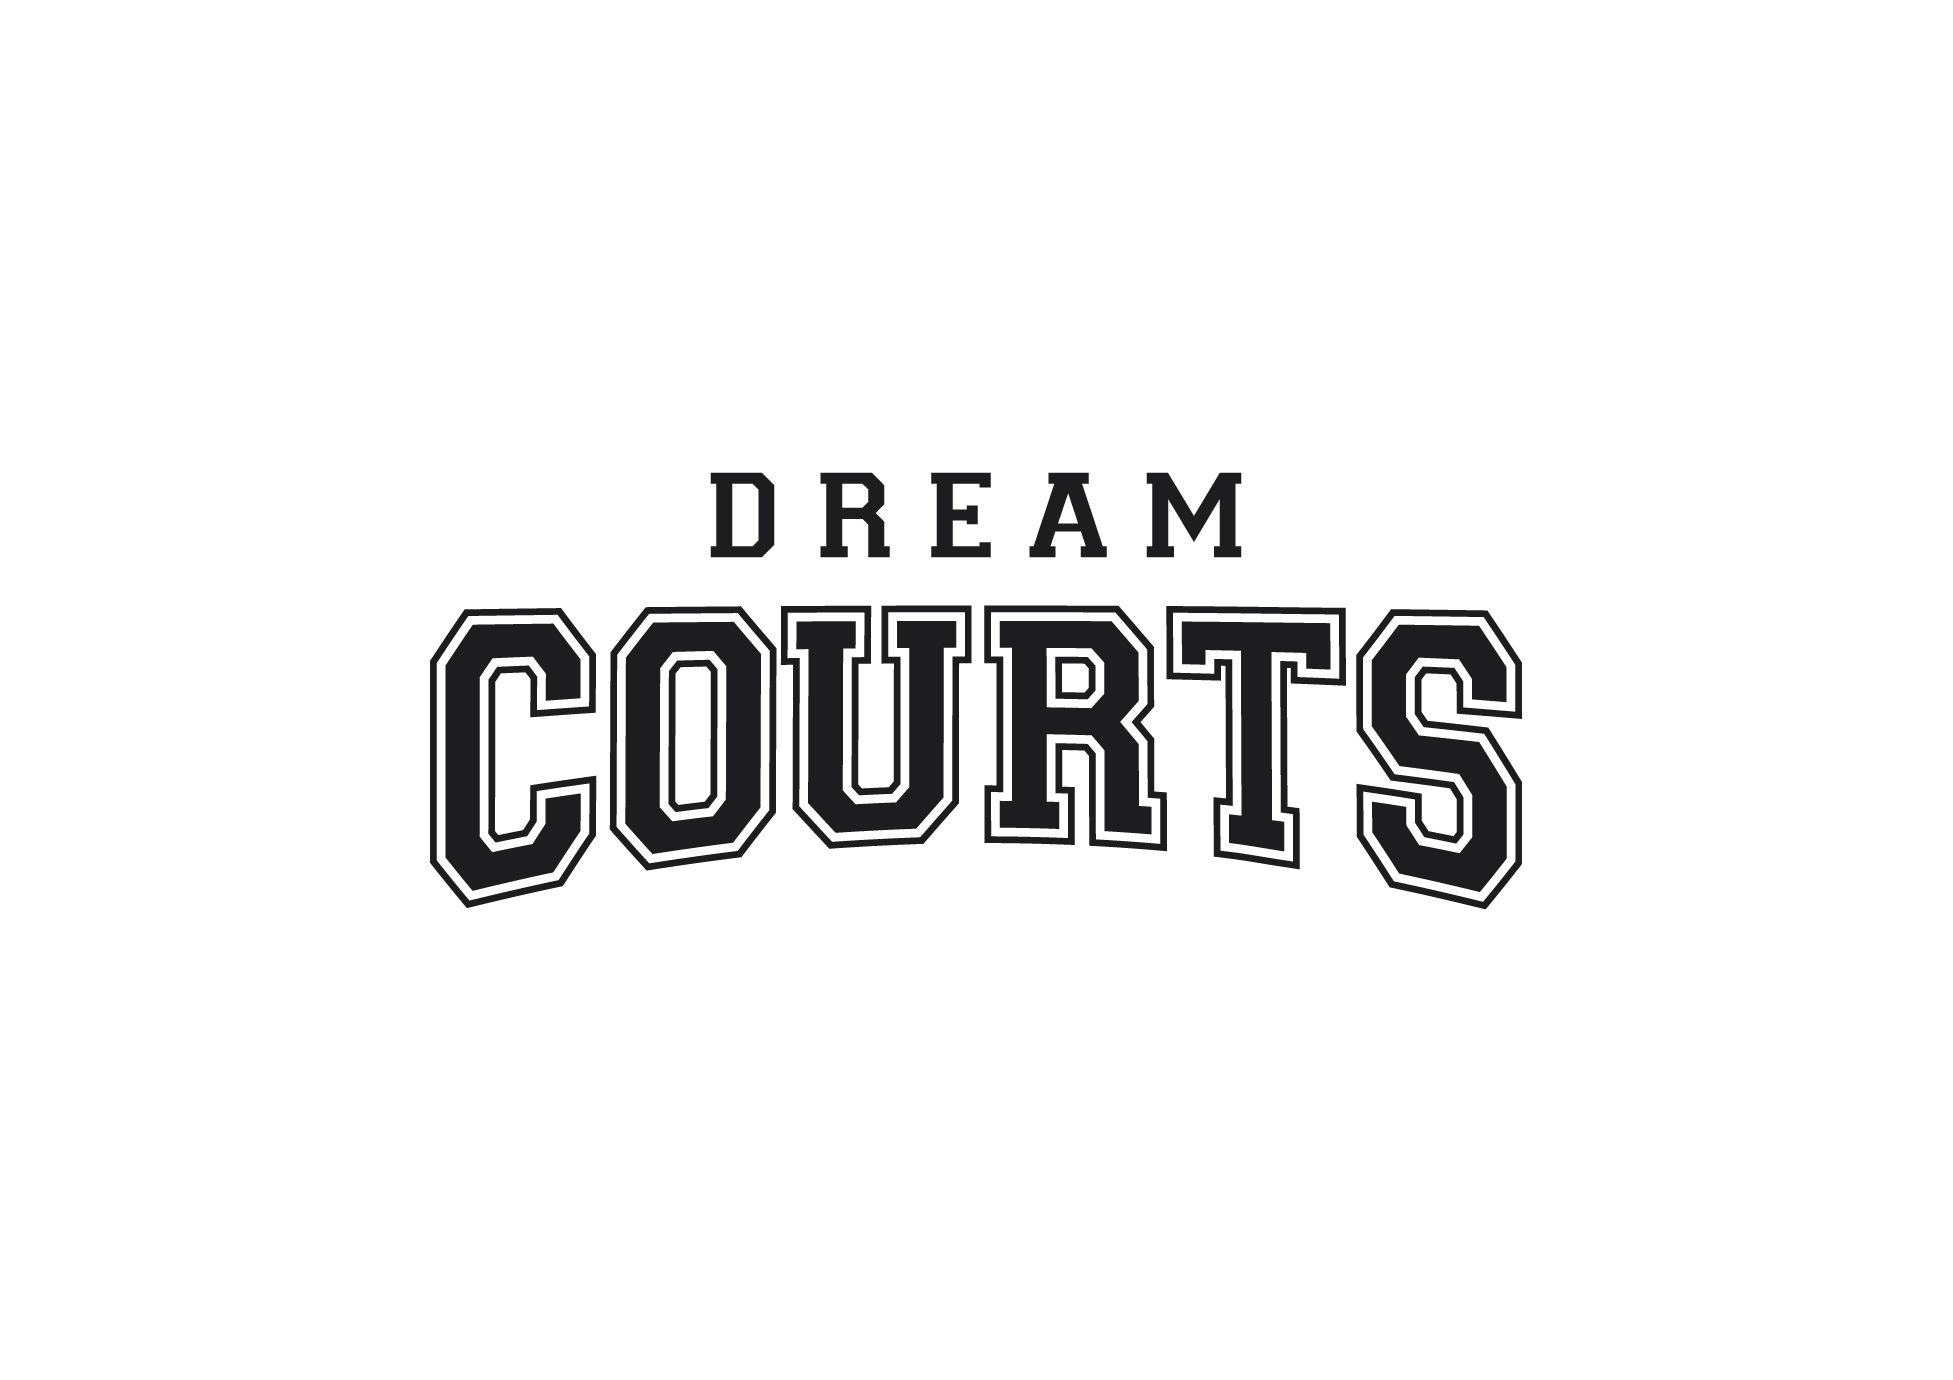 DreamCourts As Seen In The Block